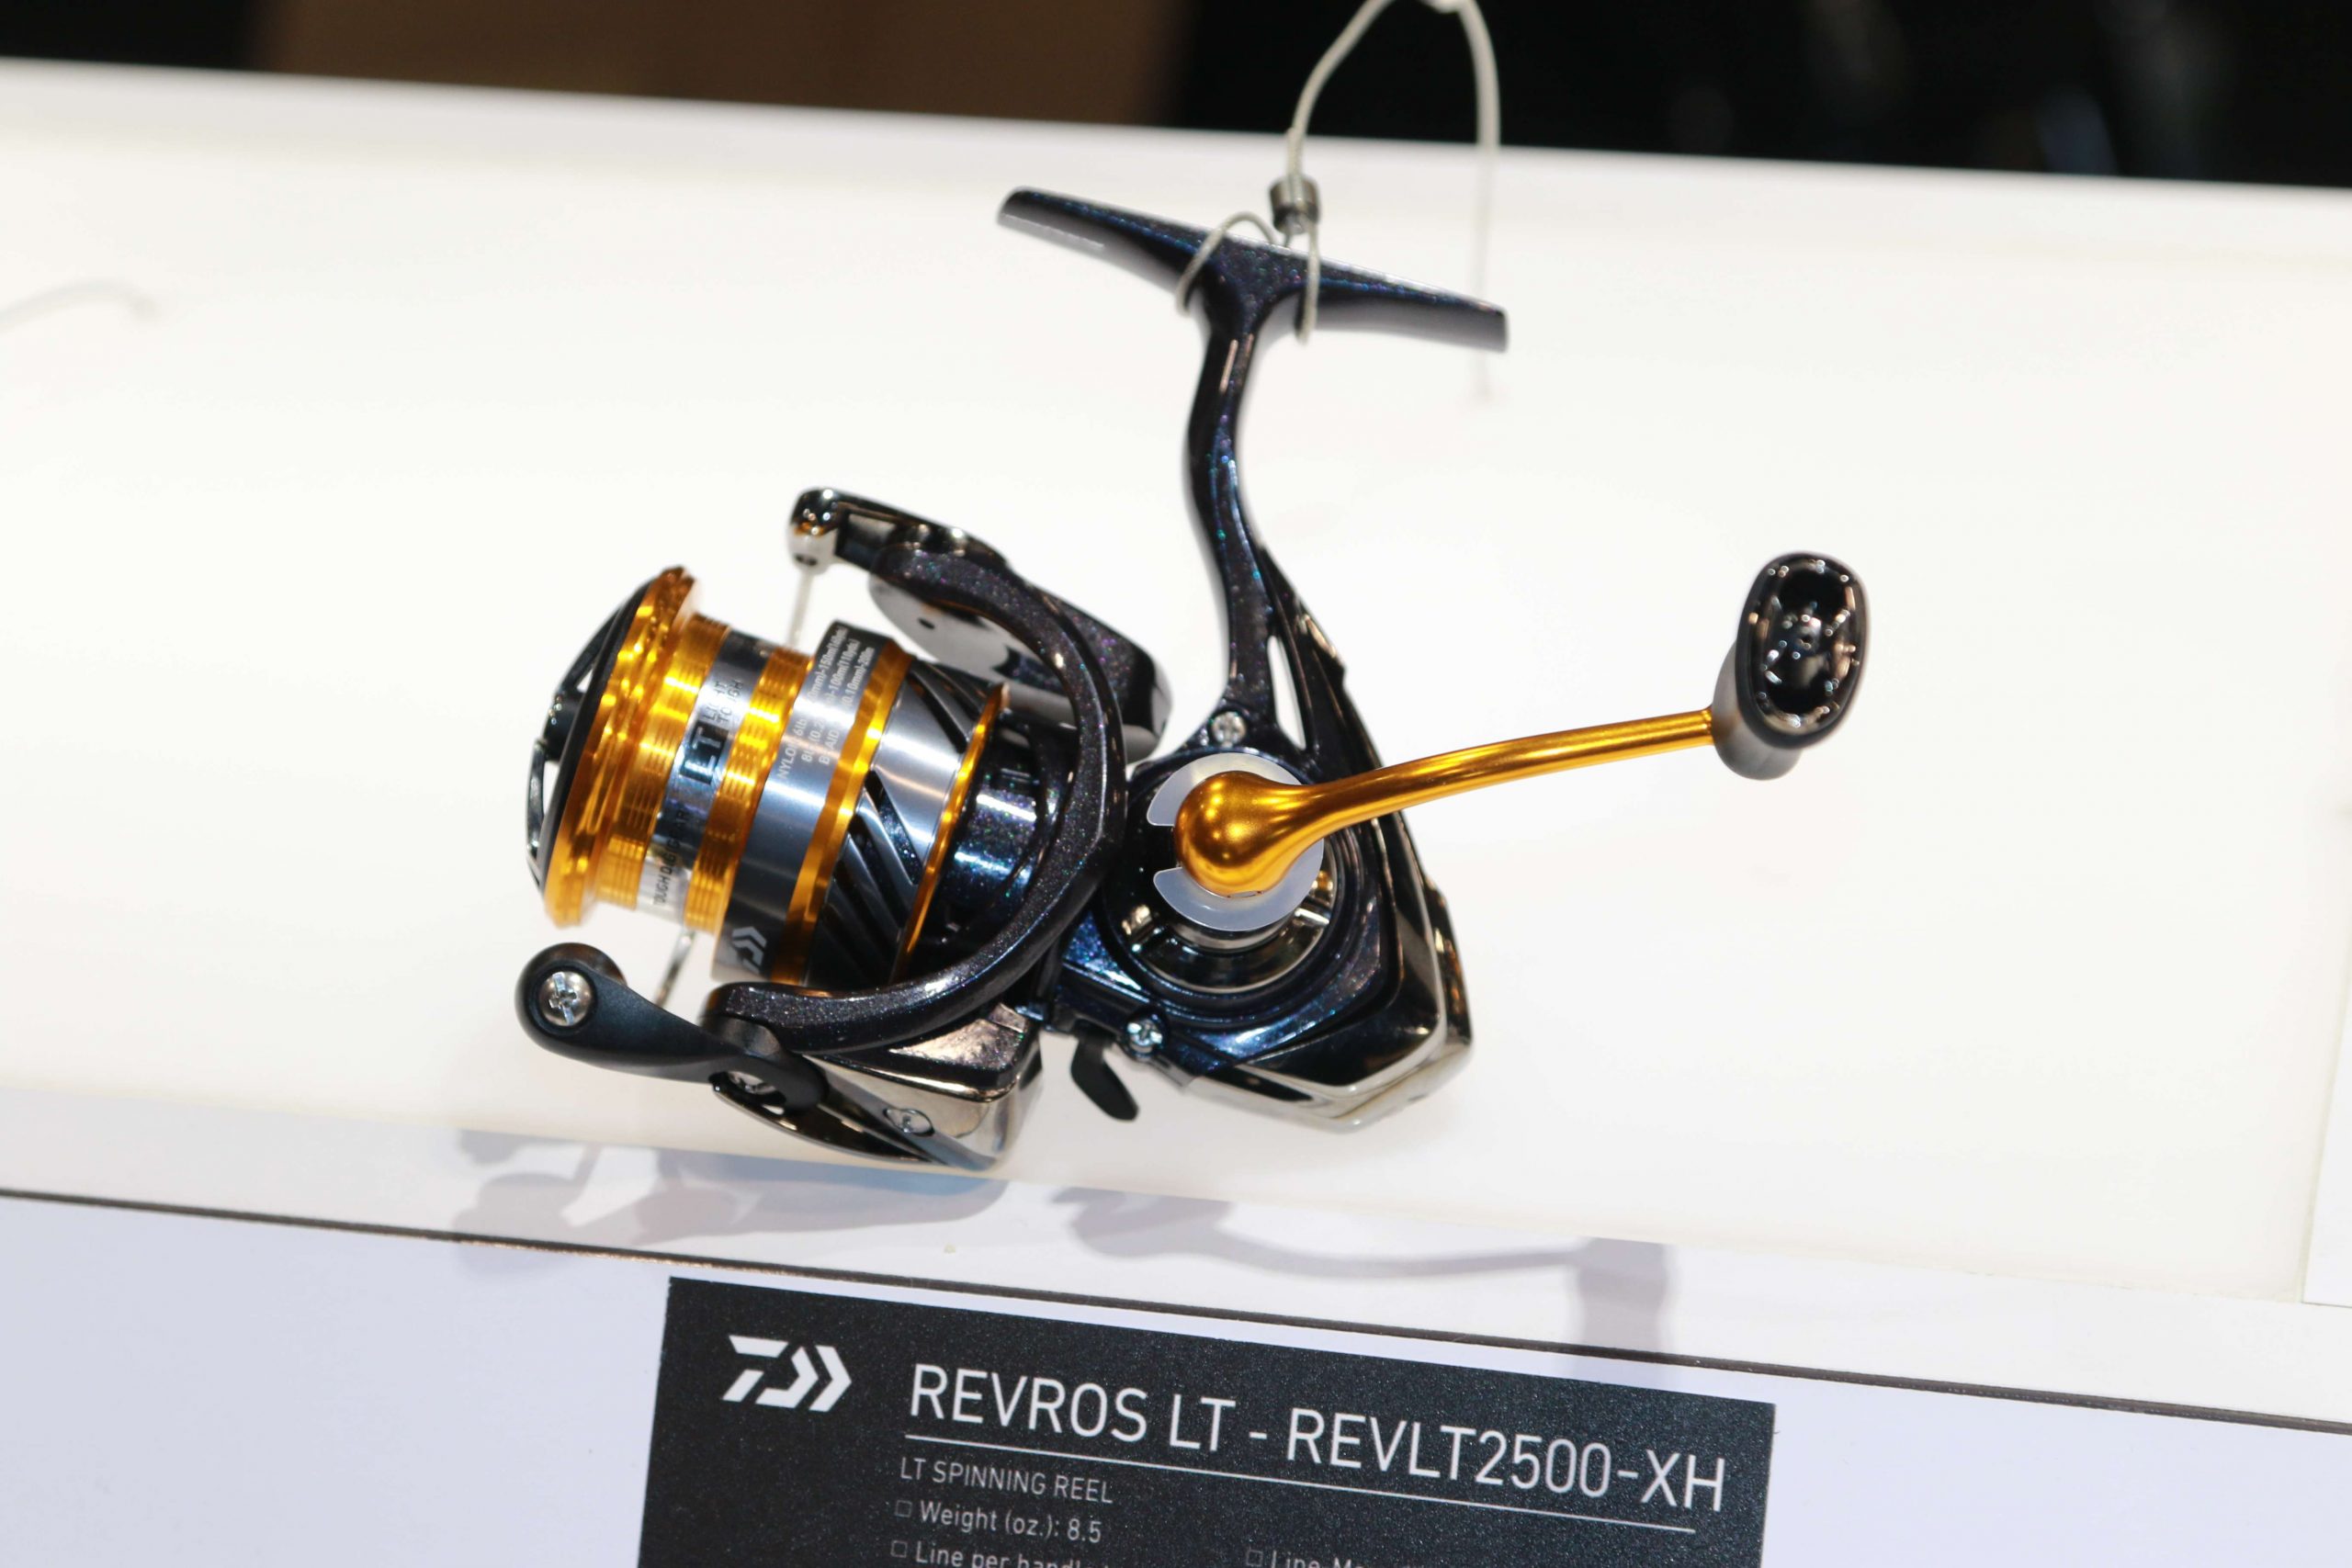 Spinning reel fans were checking out Daiwaâs Revros LT, which retails for $49.99.